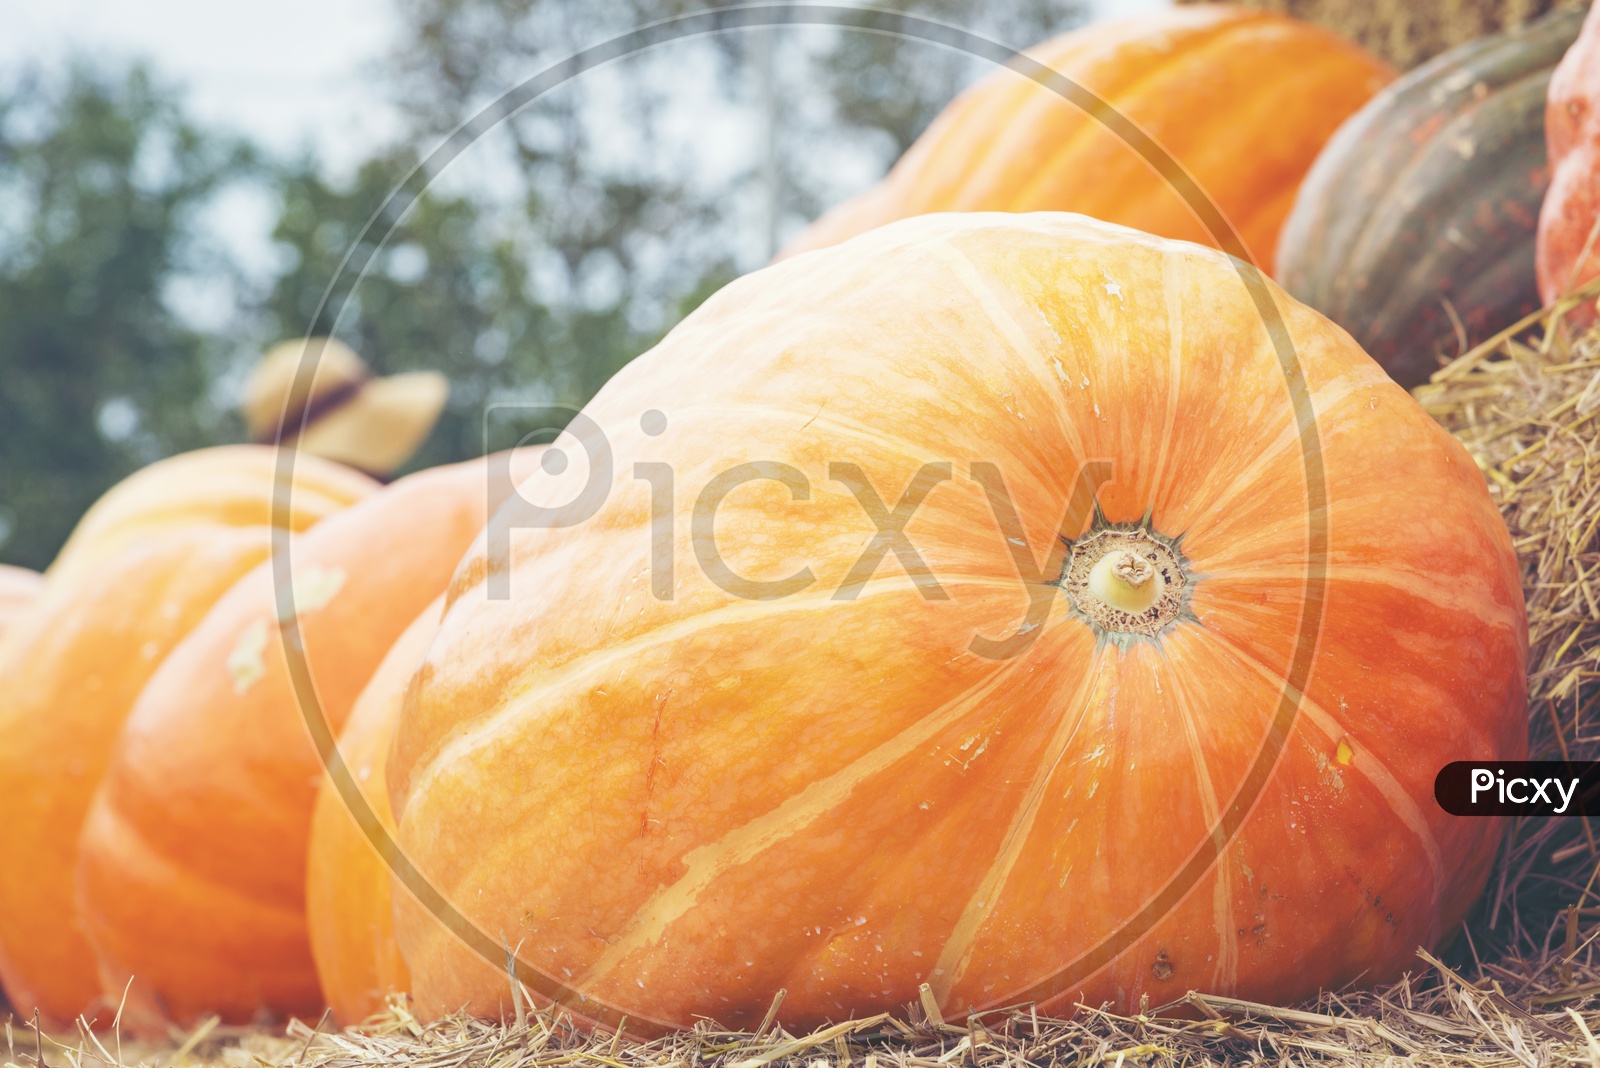 Halloween Festival Background With Giant Pumpkins